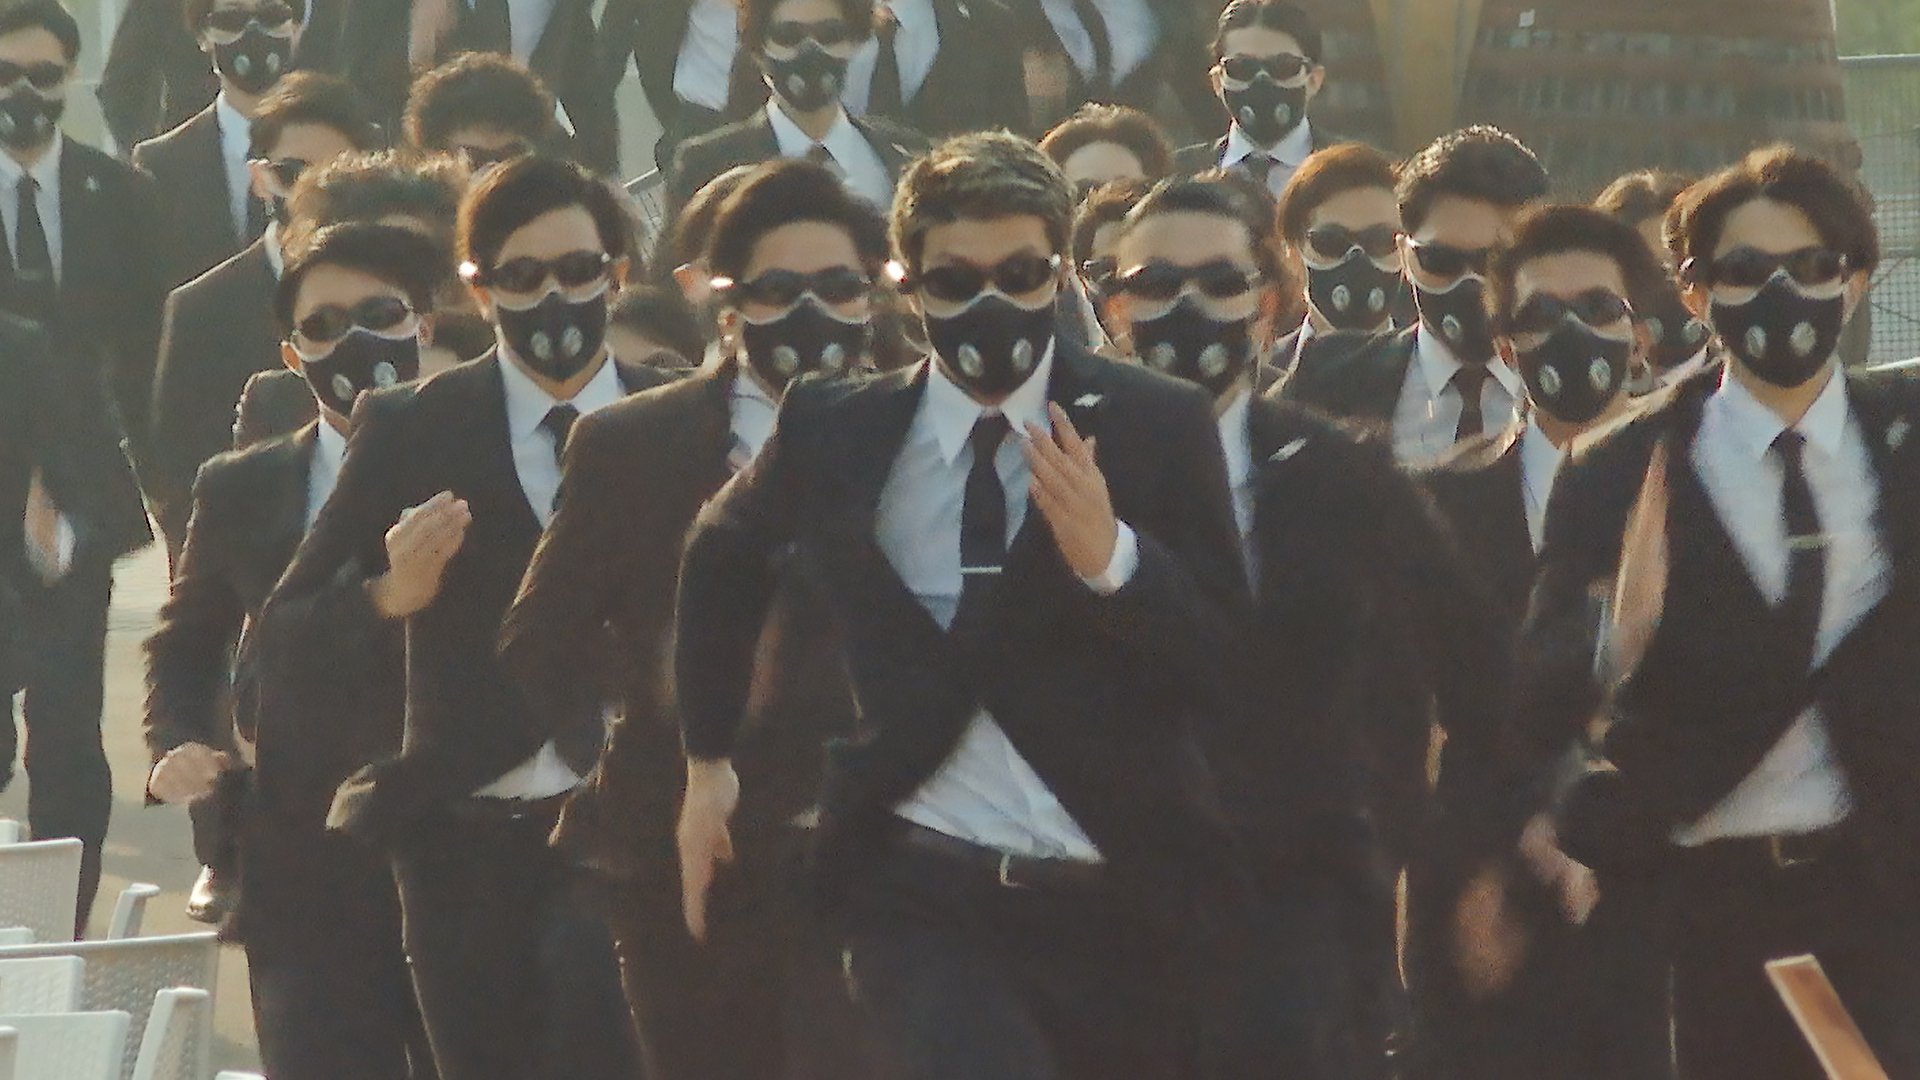 A group of men in black suits, with black face masks and sunglasses run towards the camera.